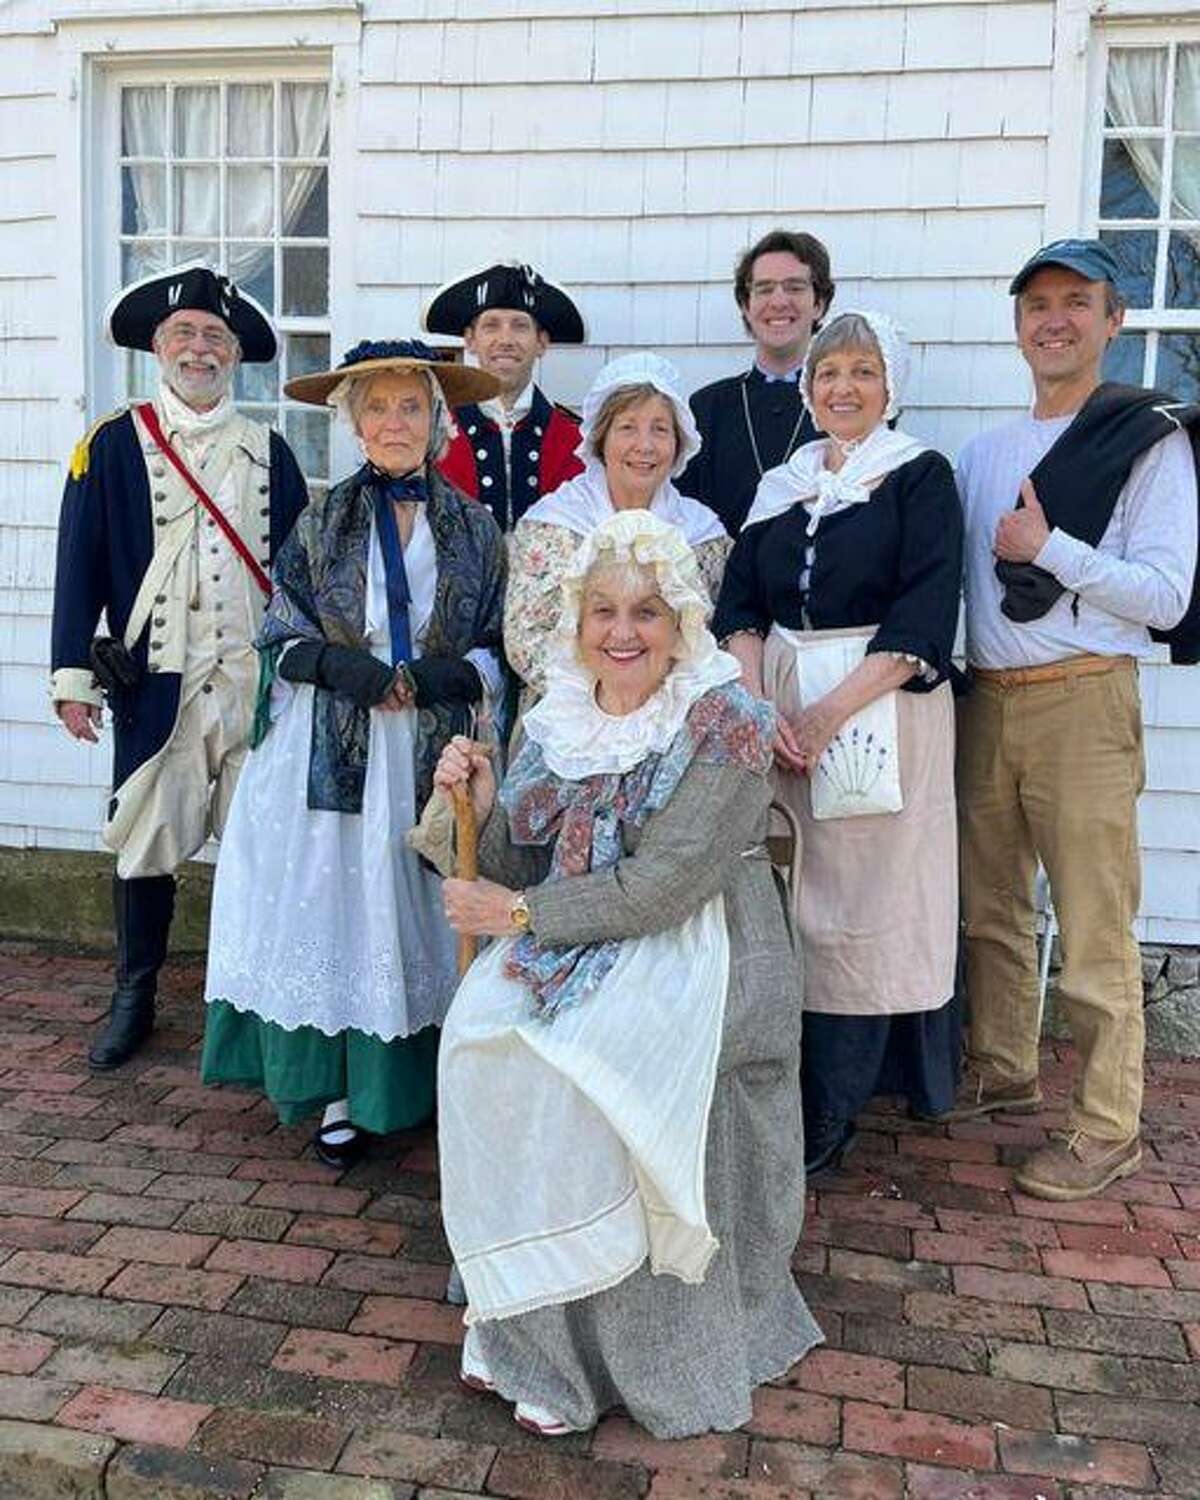 Members from Jesse Lee Memorial United Methodist Church are rehearsing for the Battle of Ridgefield reenactment, part of the town's weekend-long commemoration of the 245th anniversary.